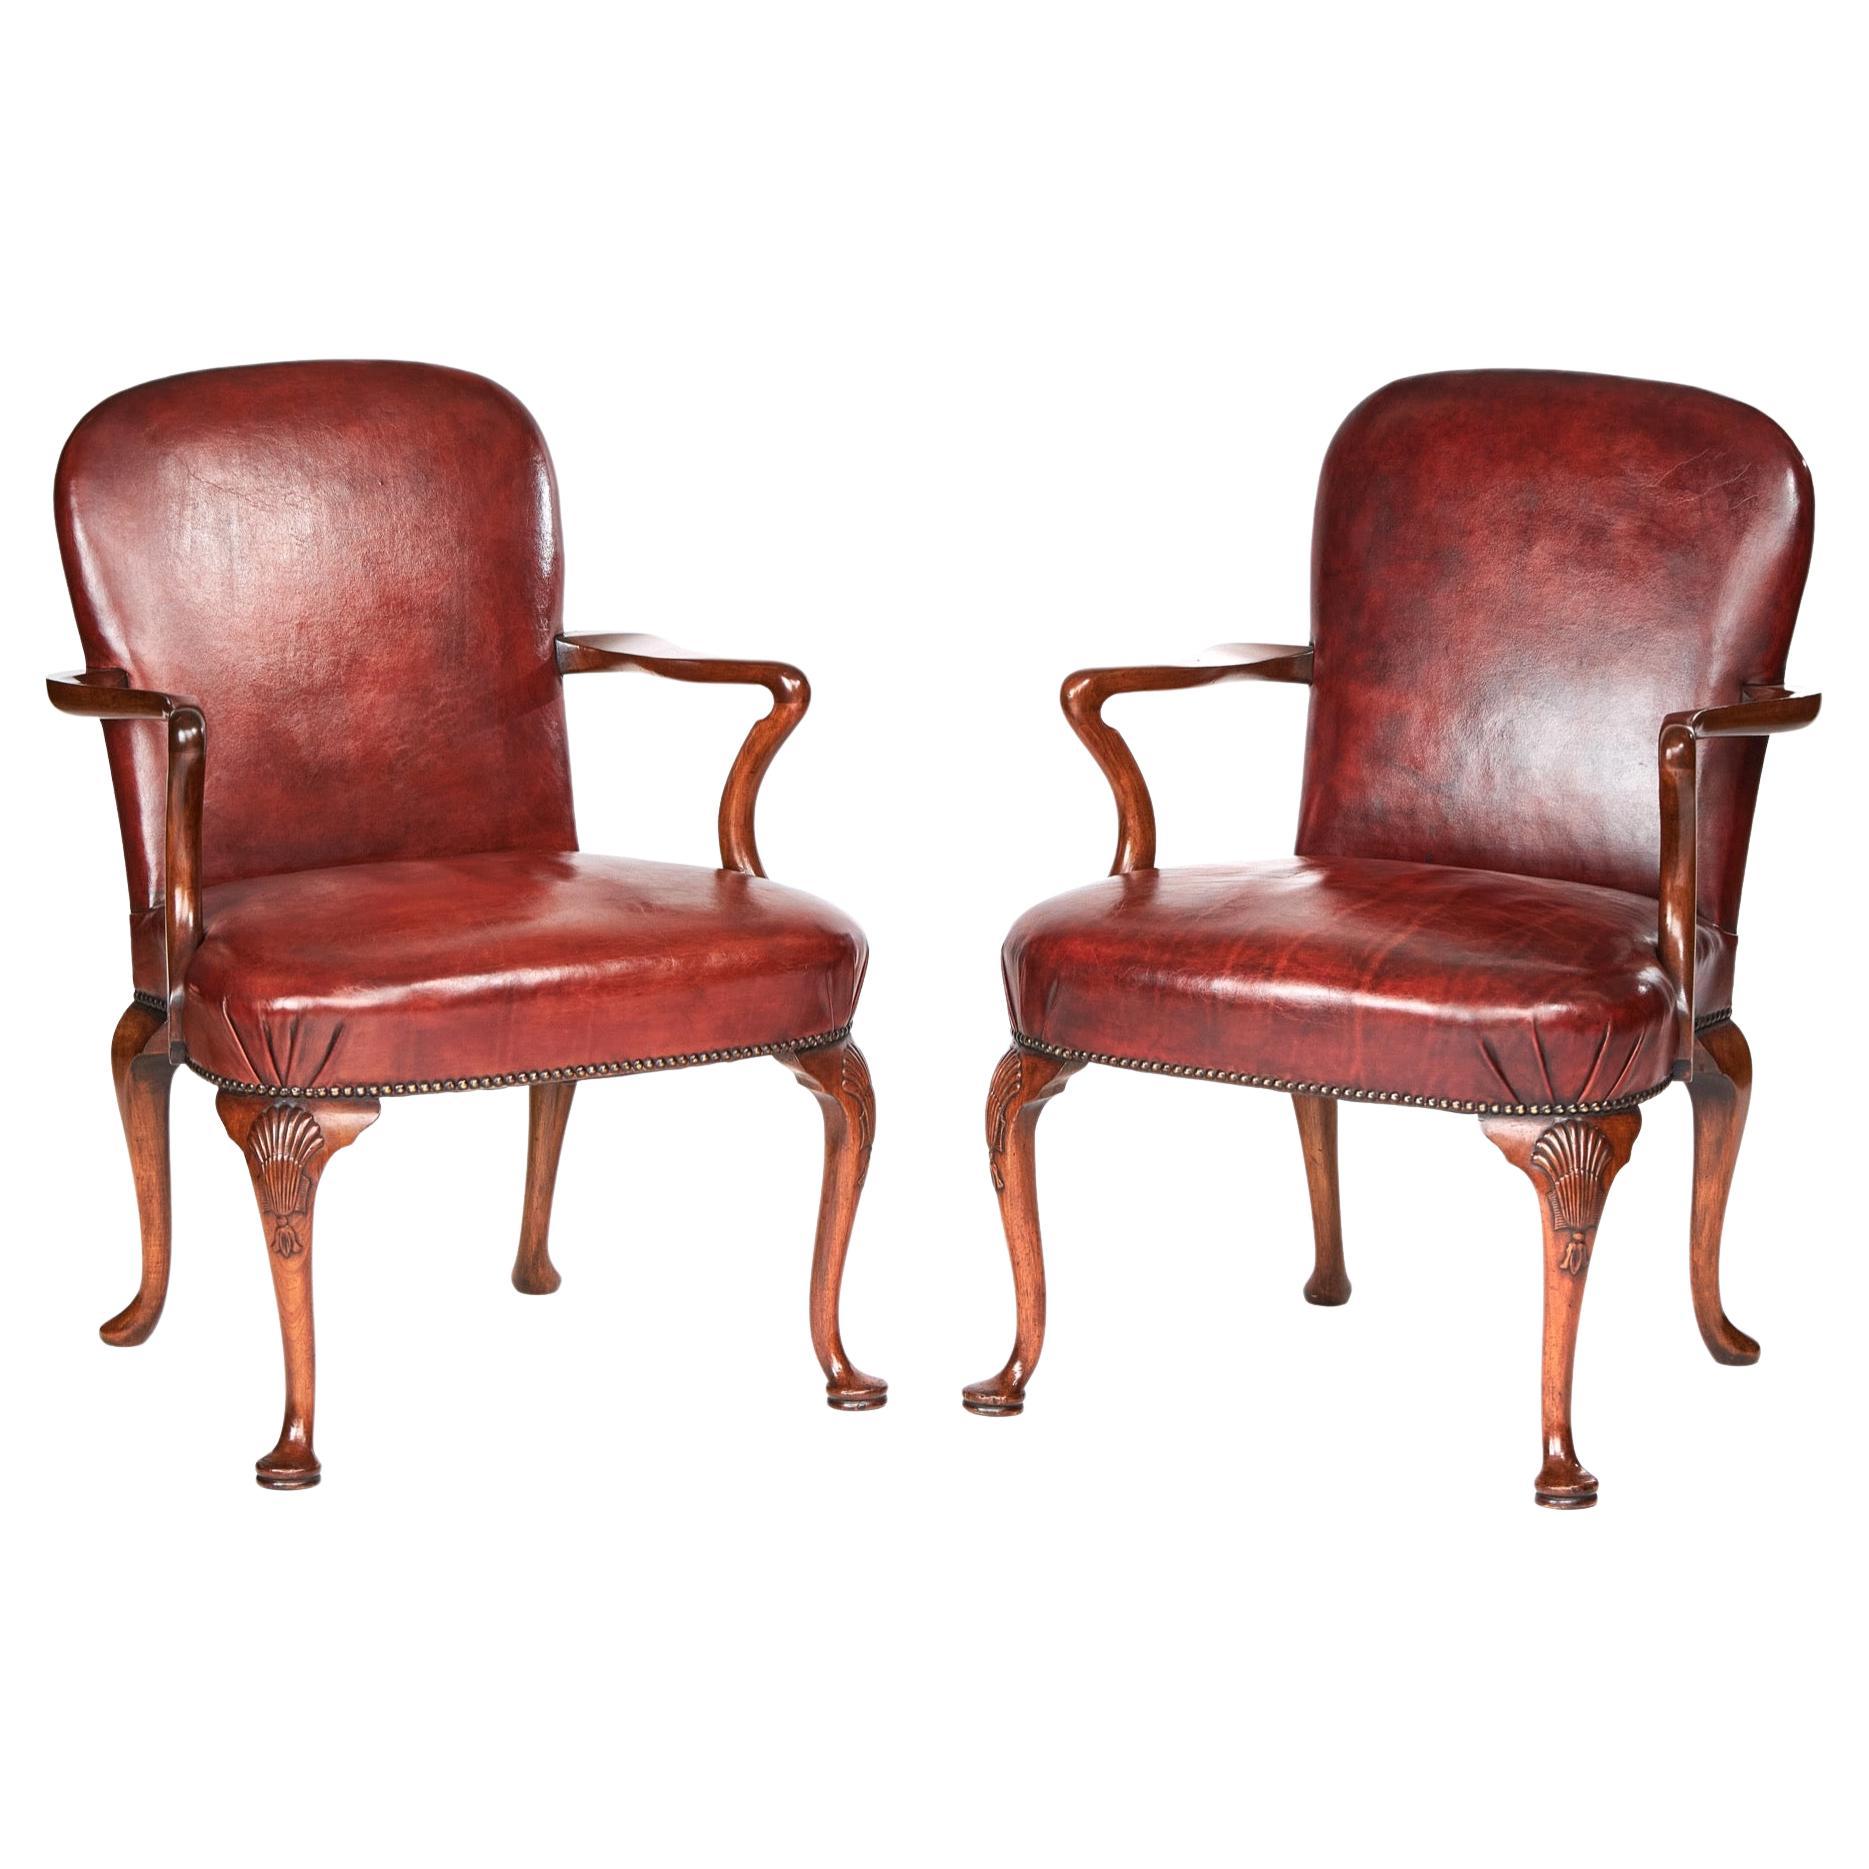 Pair Georgian Revival Walnut & Leather Open Elbow Chairs, circa 1920s For Sale